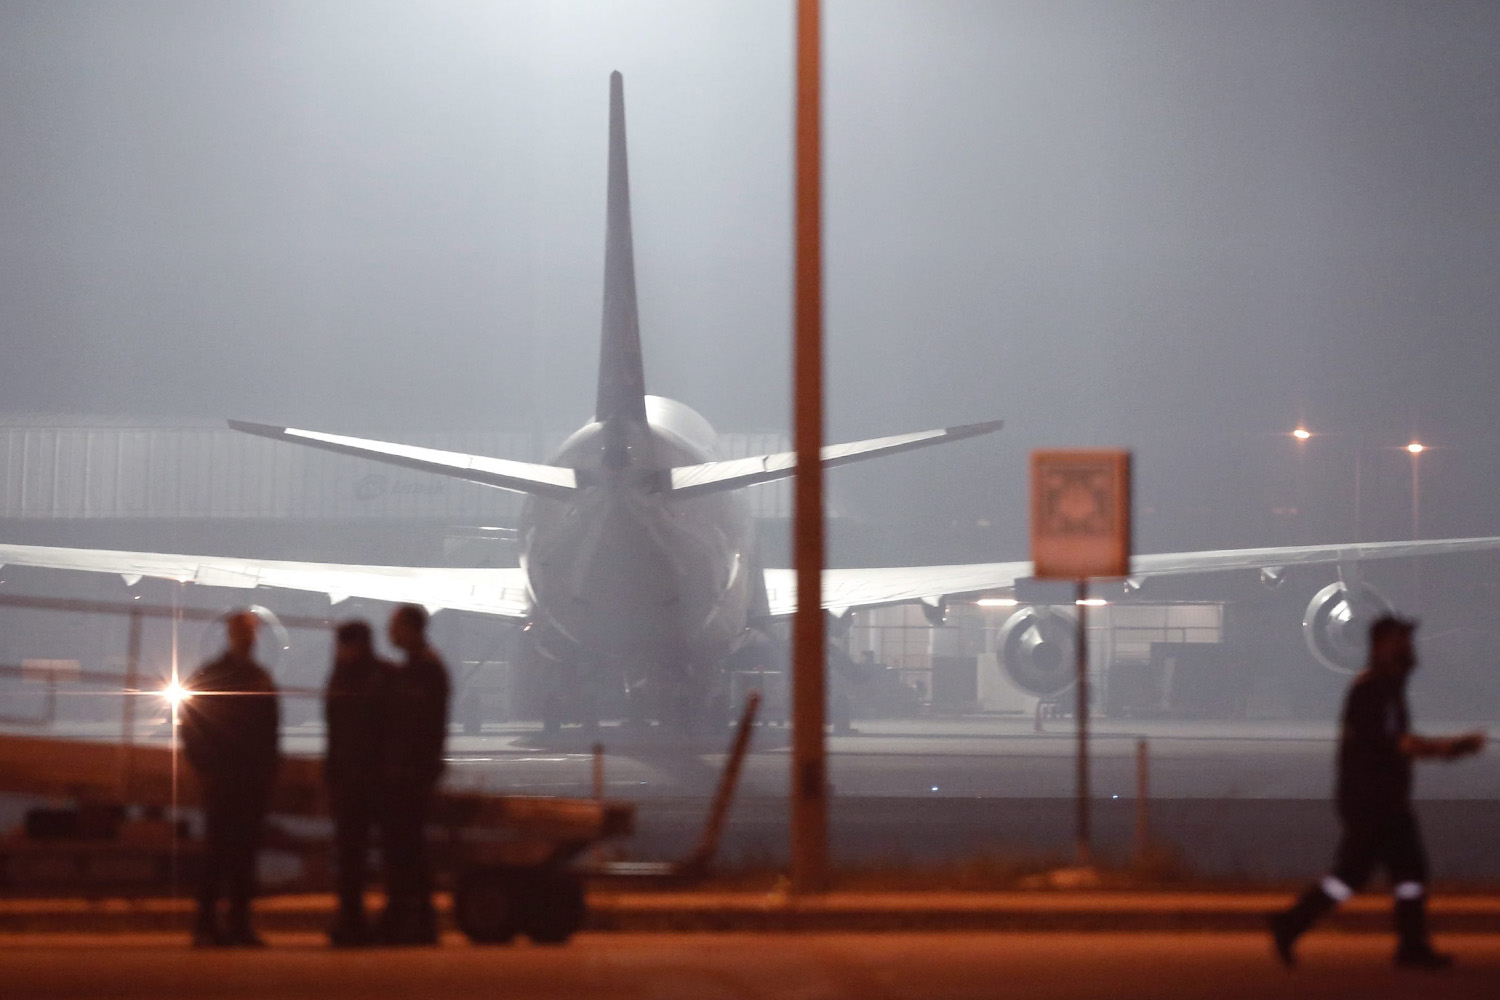 Turkish police forces arrive at the scene after hijacked airplane of a Turkish company Pegasus Airlines was landed at Sabiha Gokcen Airport in Istanbul, on Feb. 7, 2014. (Tolga Bozoglu&mdash;EPA)